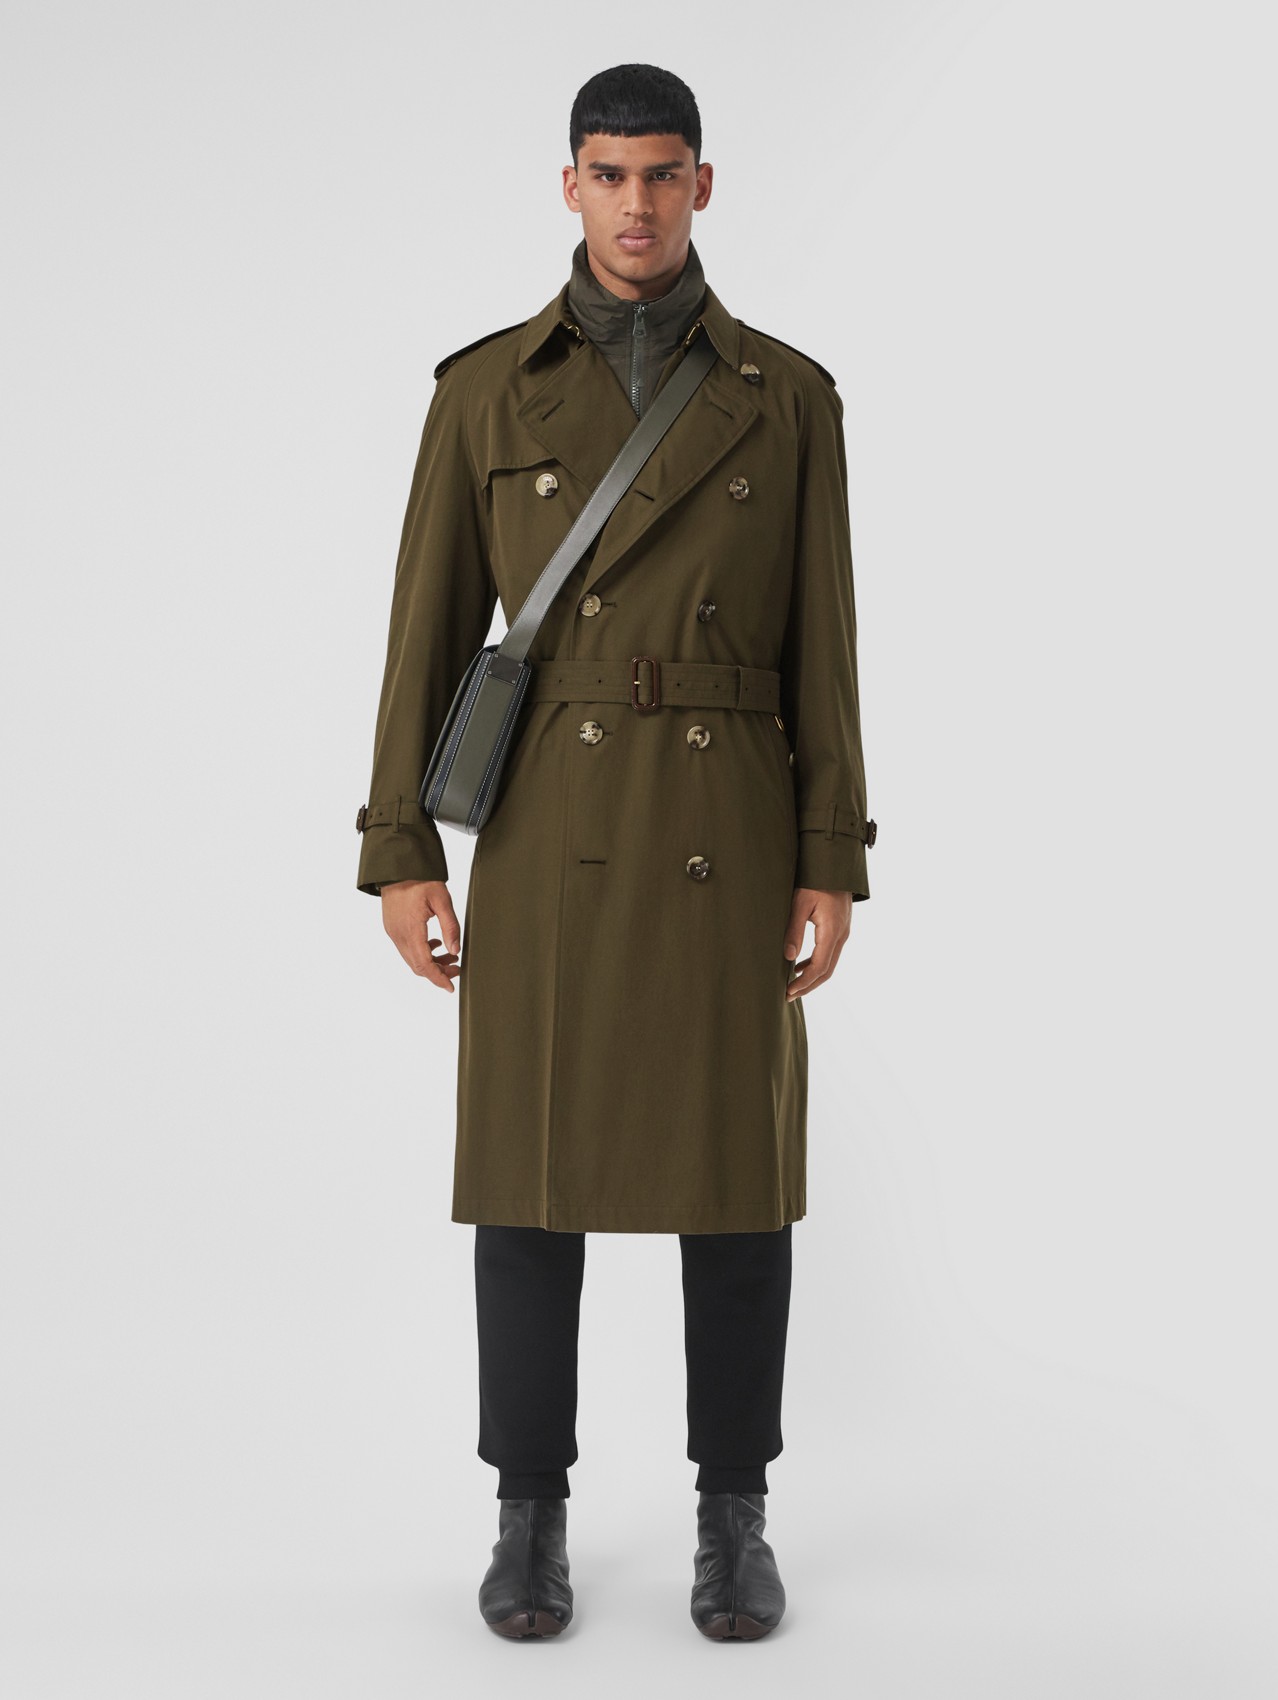 The Westminster Heritage Trench Coat in Dark Military Khaki